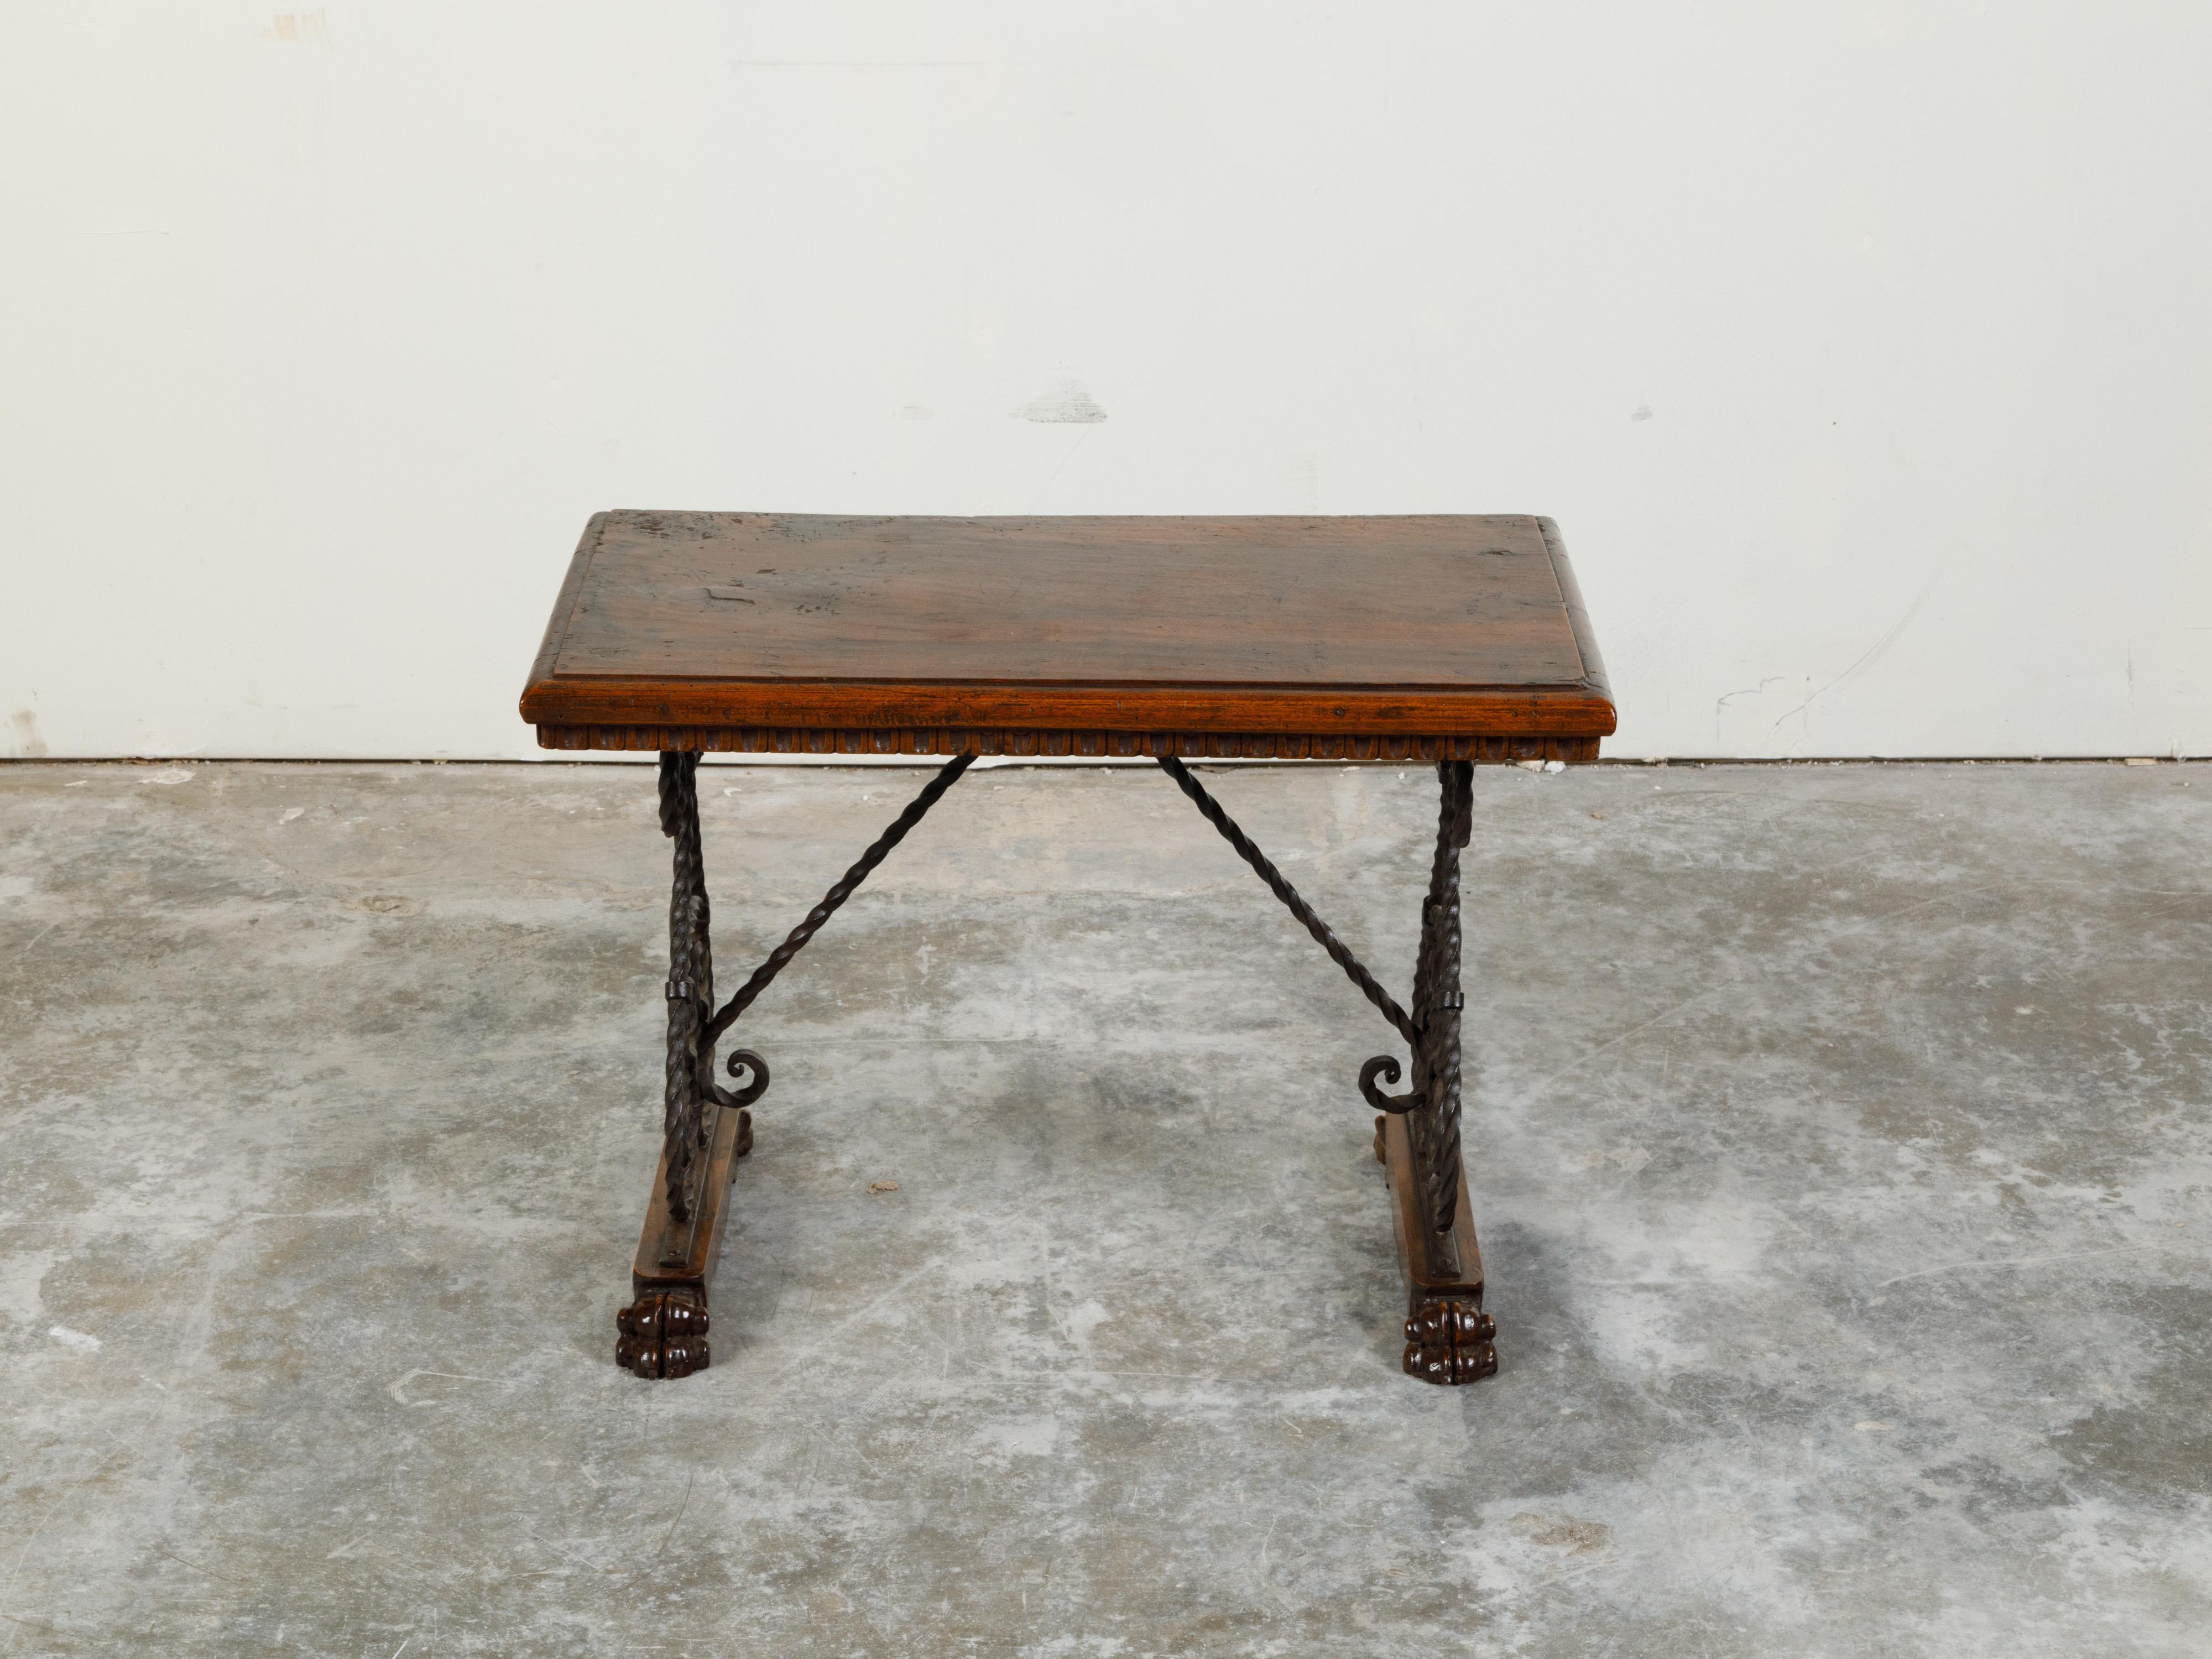 Italian 1900s Walnut Top Console Table with Iron Base and Fleur de Lys Motifs In Good Condition For Sale In Atlanta, GA